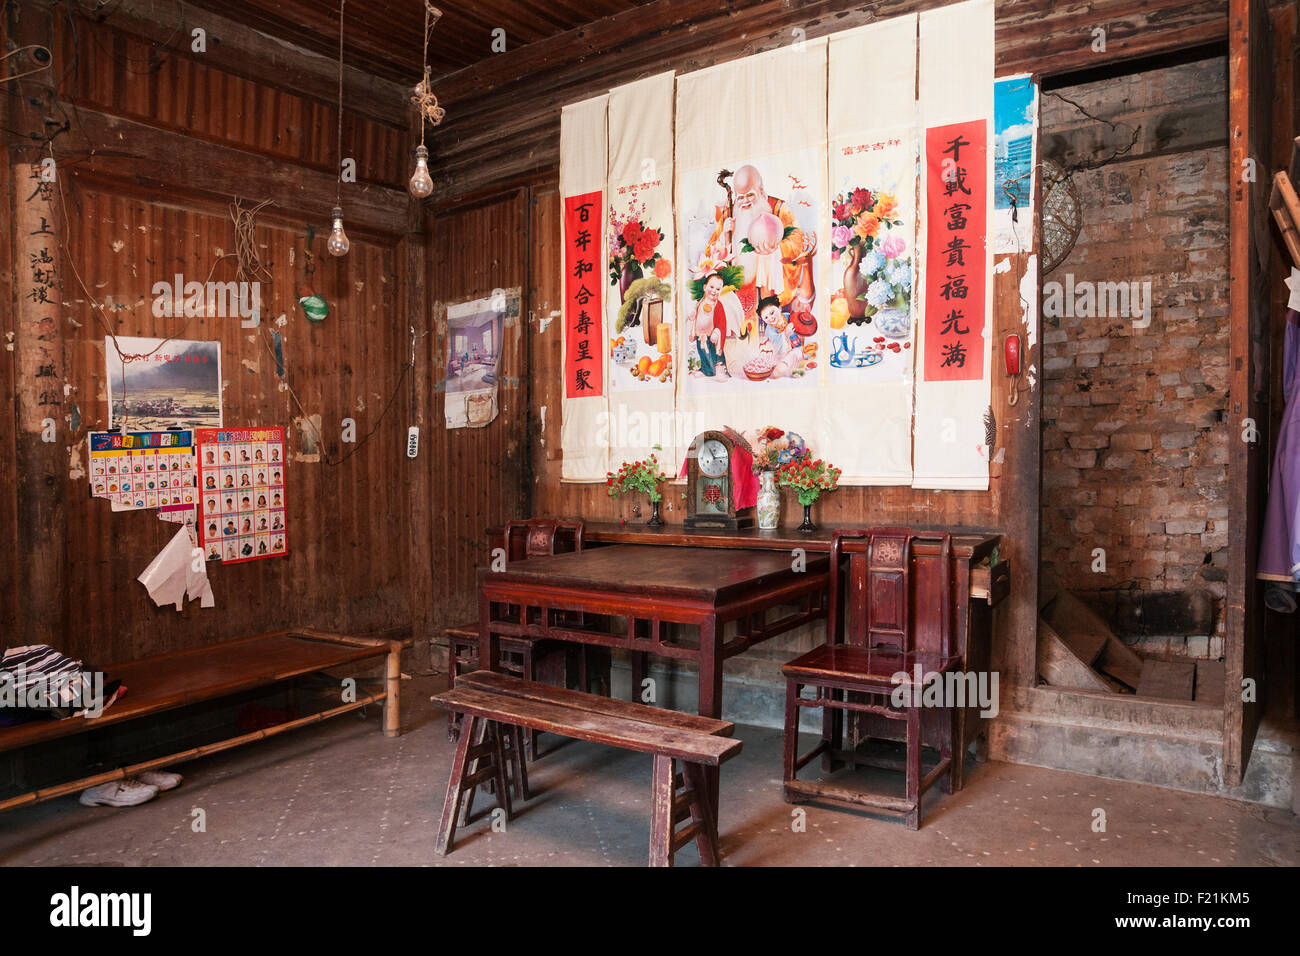 Interior of a living room with table and chairs and Chinese script and illustrative decorations in Shichuon village, China Stock Photo